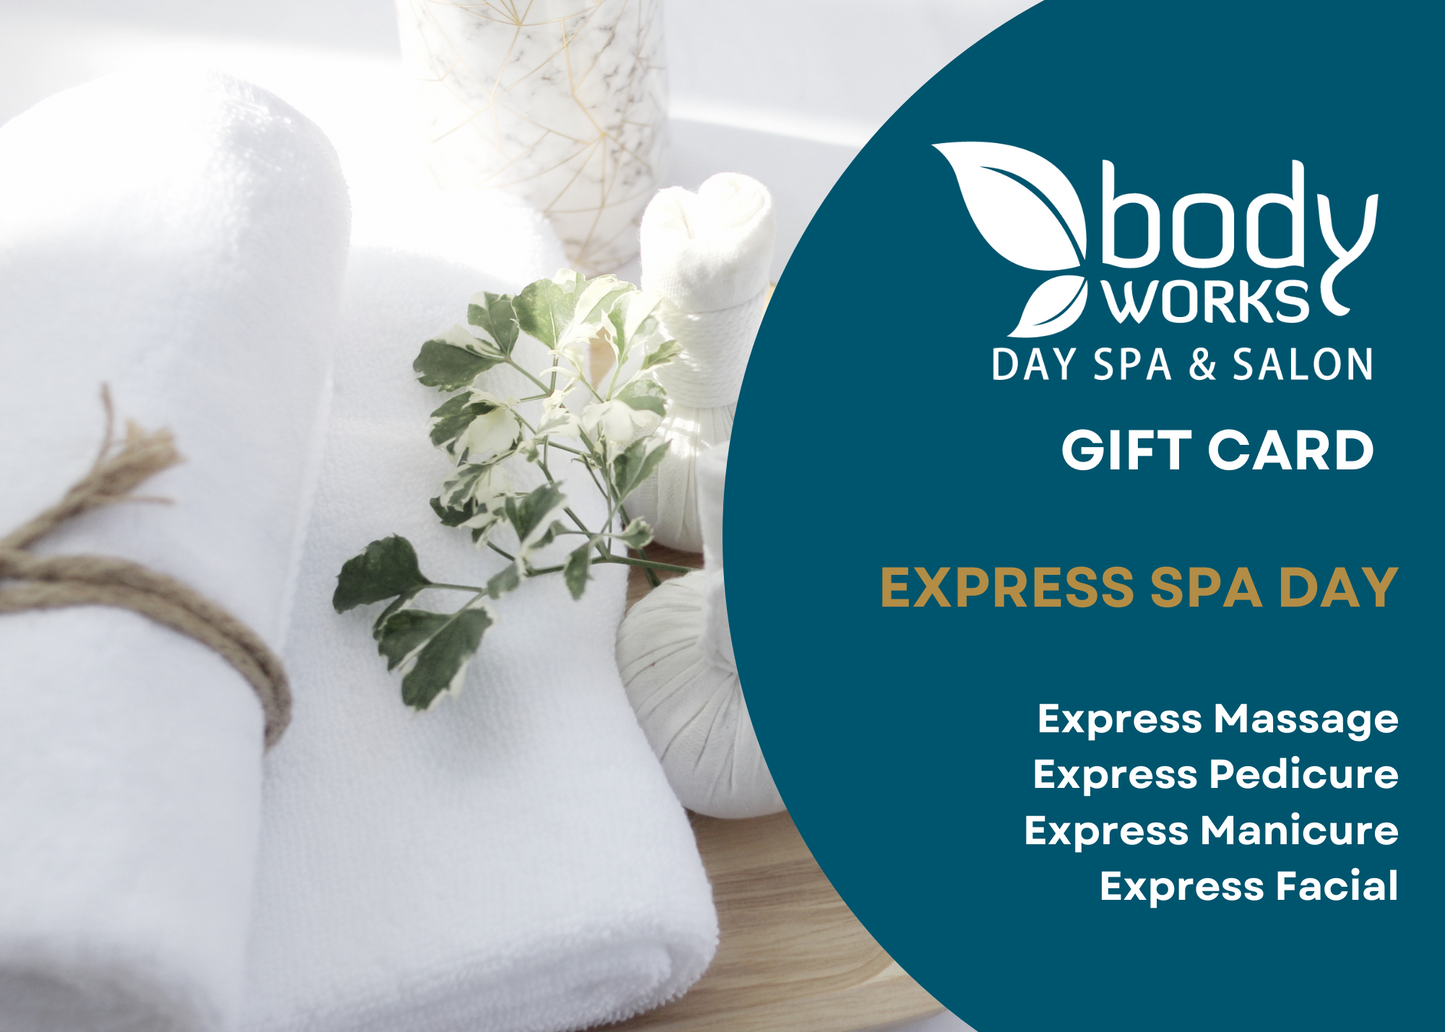 Express Spa Day Gift Card